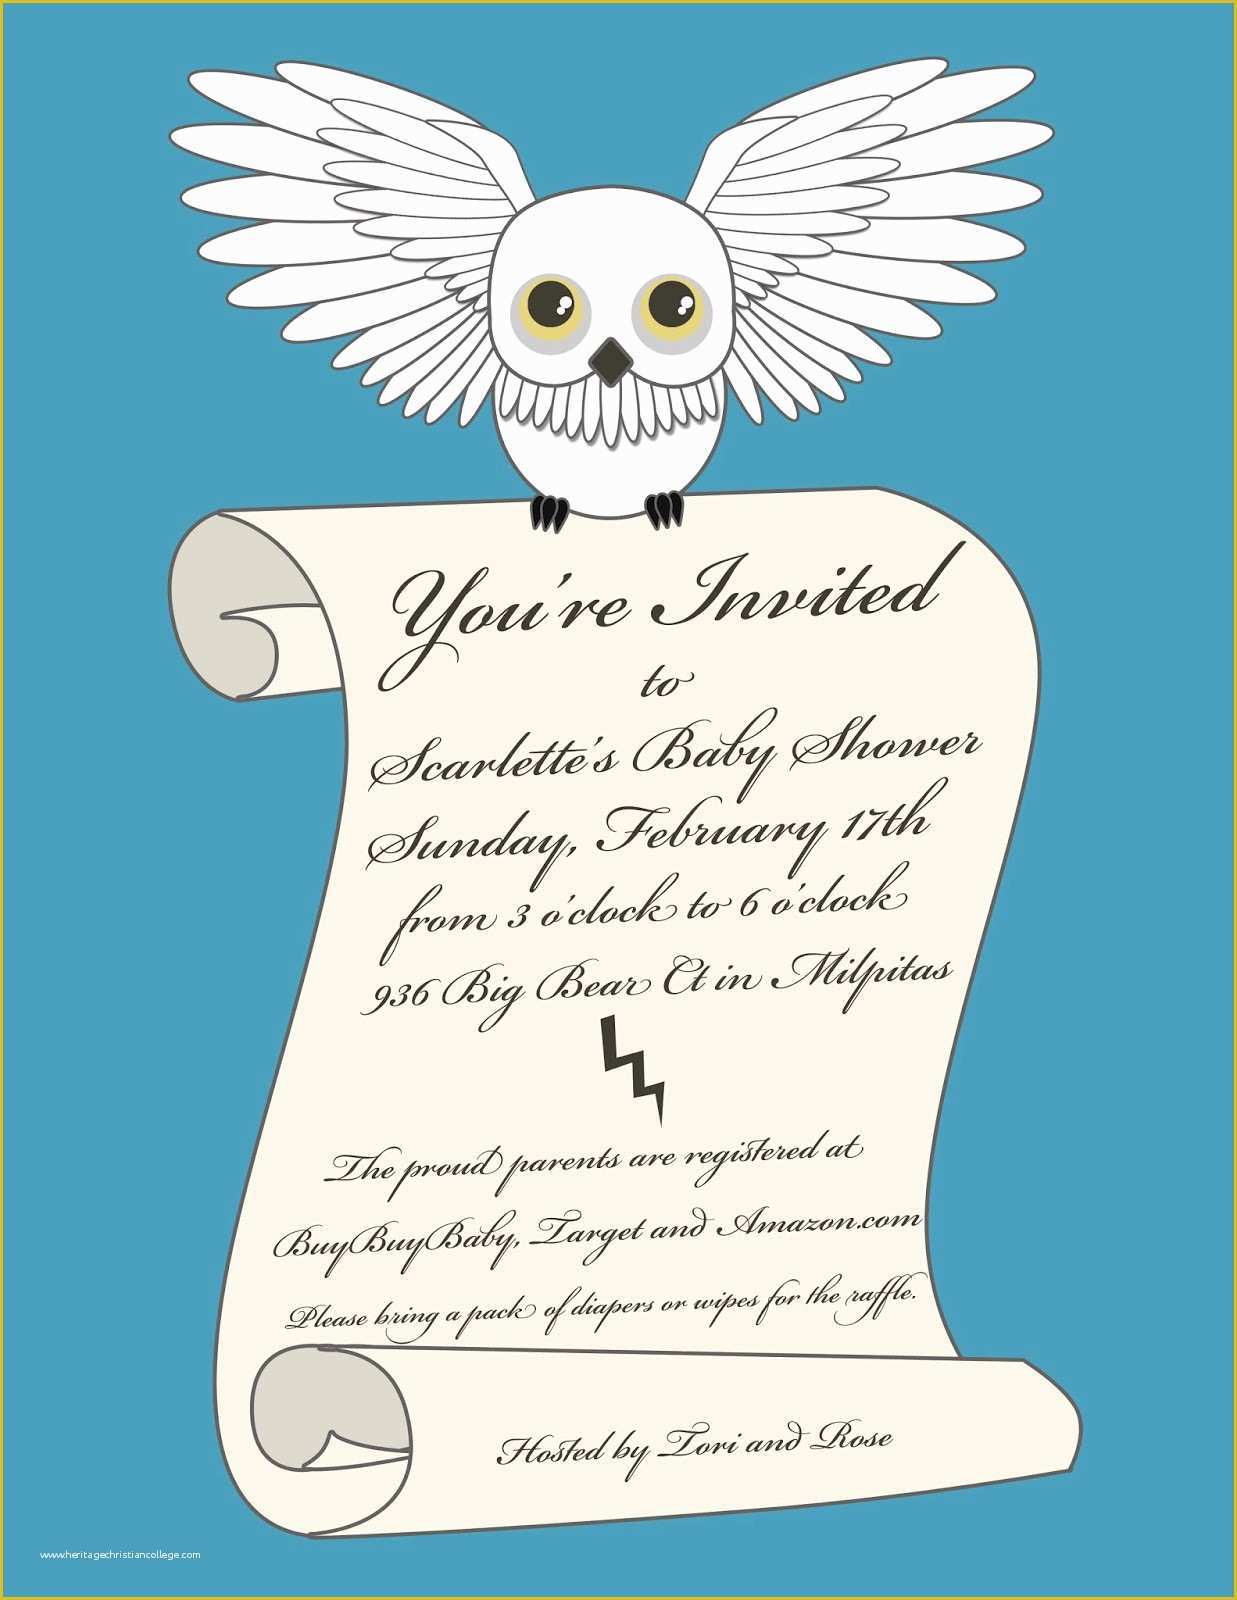 Harry Potter Baby Shower Invitation Template Free Of Notoriousstar Designs Harry Potter Baby Shower Invitation